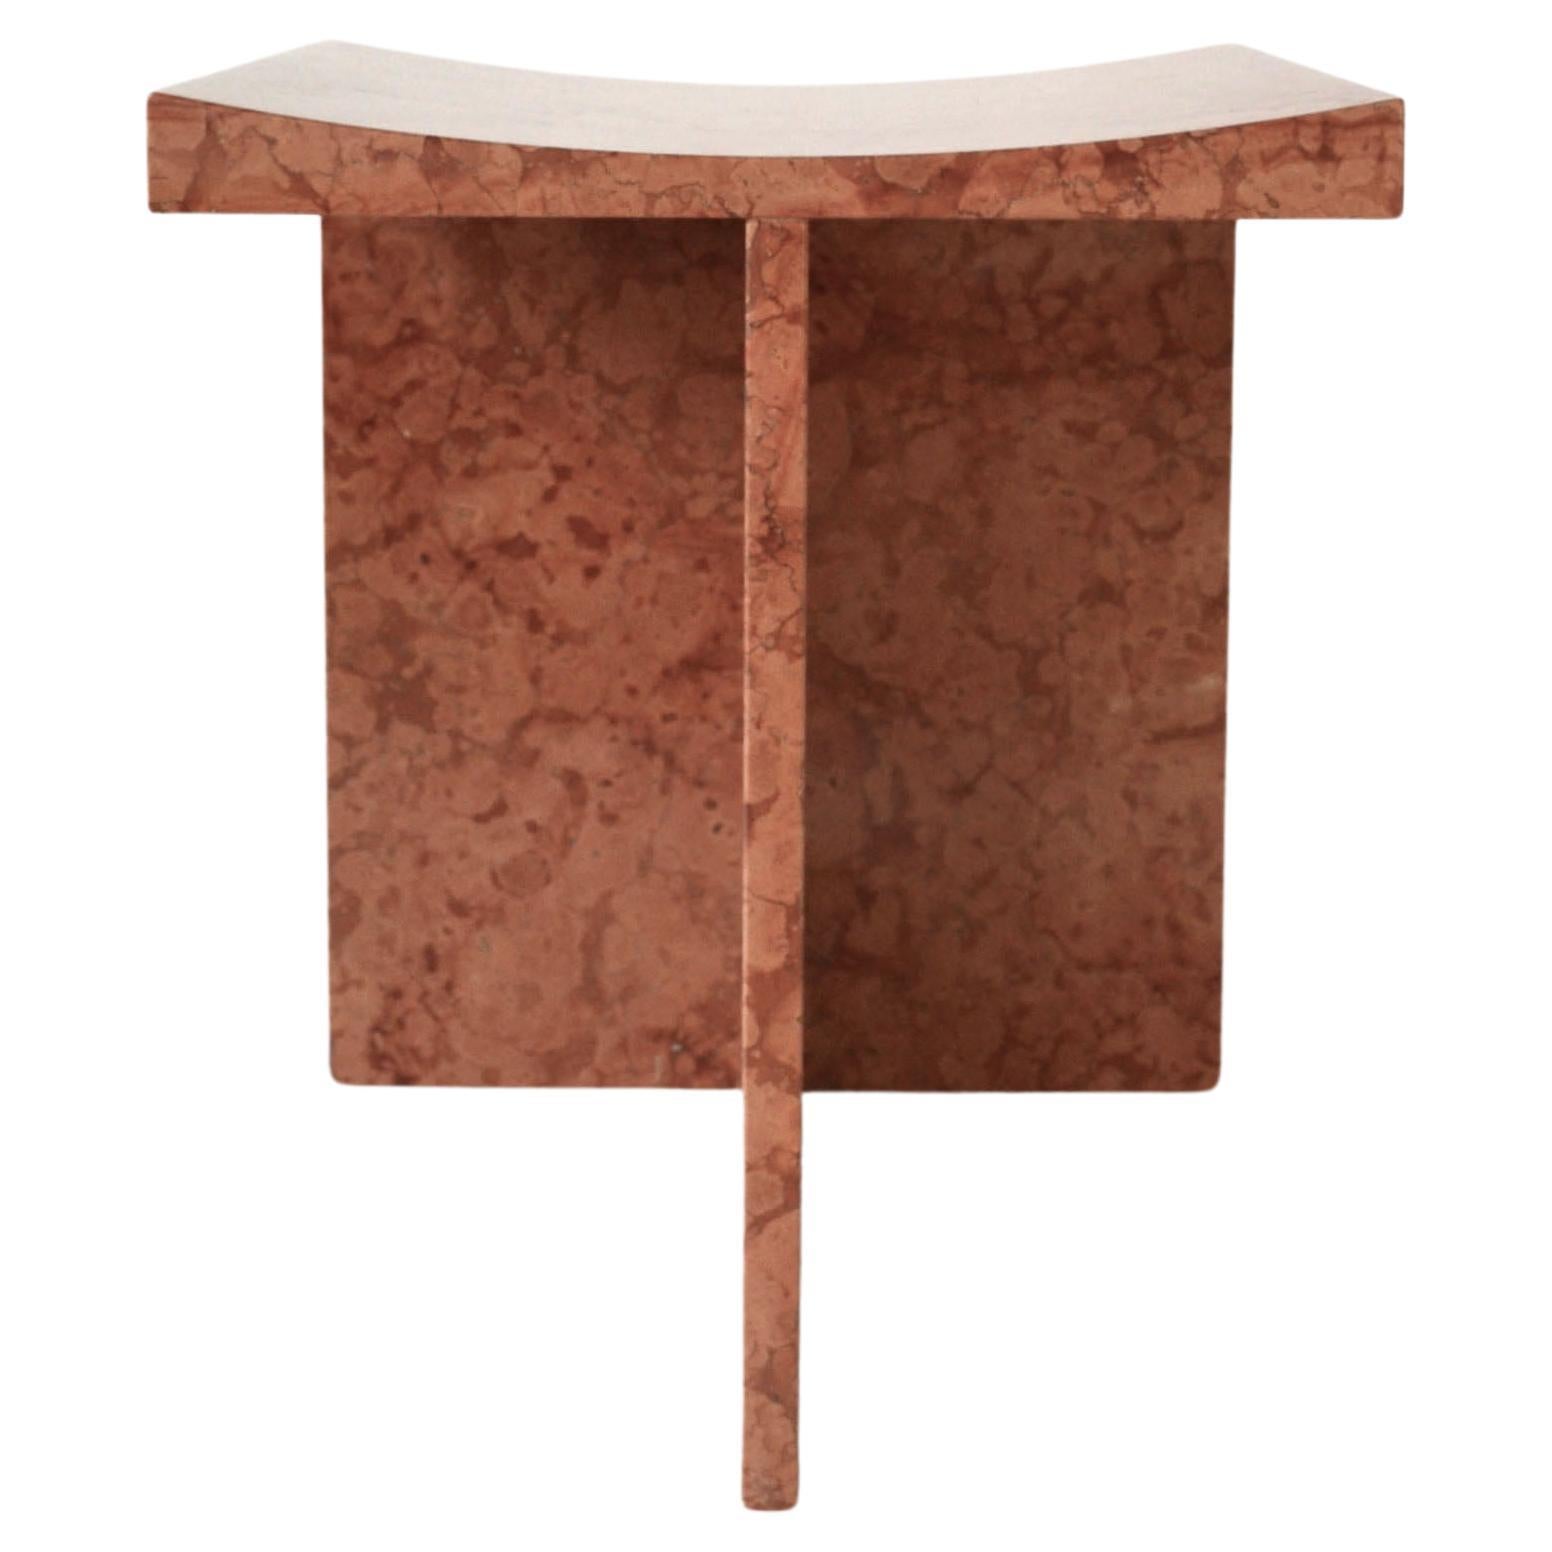 Thebes - Rosso Verona Marble Contemporary Stool Designed by McGannon Saad For Sale